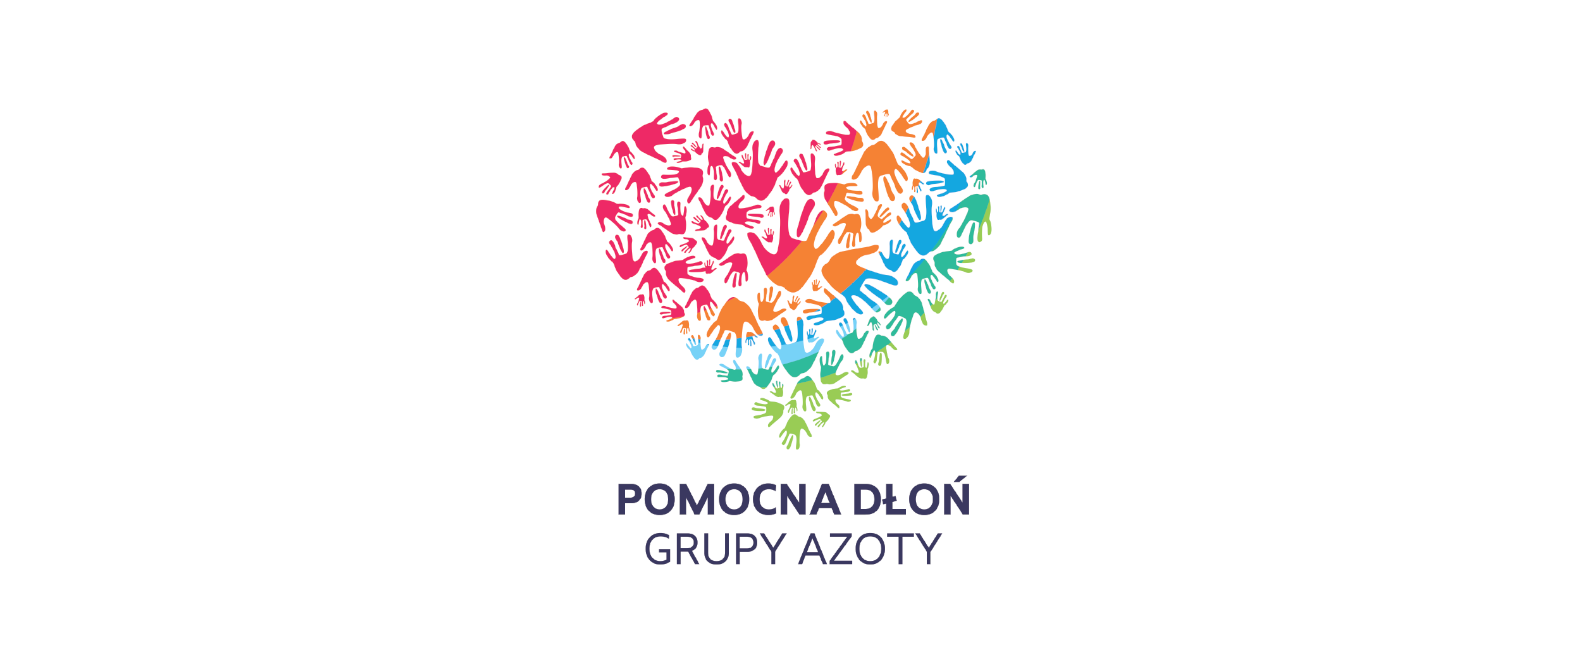 Grupa Azoty to organise summer camp for children affected by Nowa Biała fire